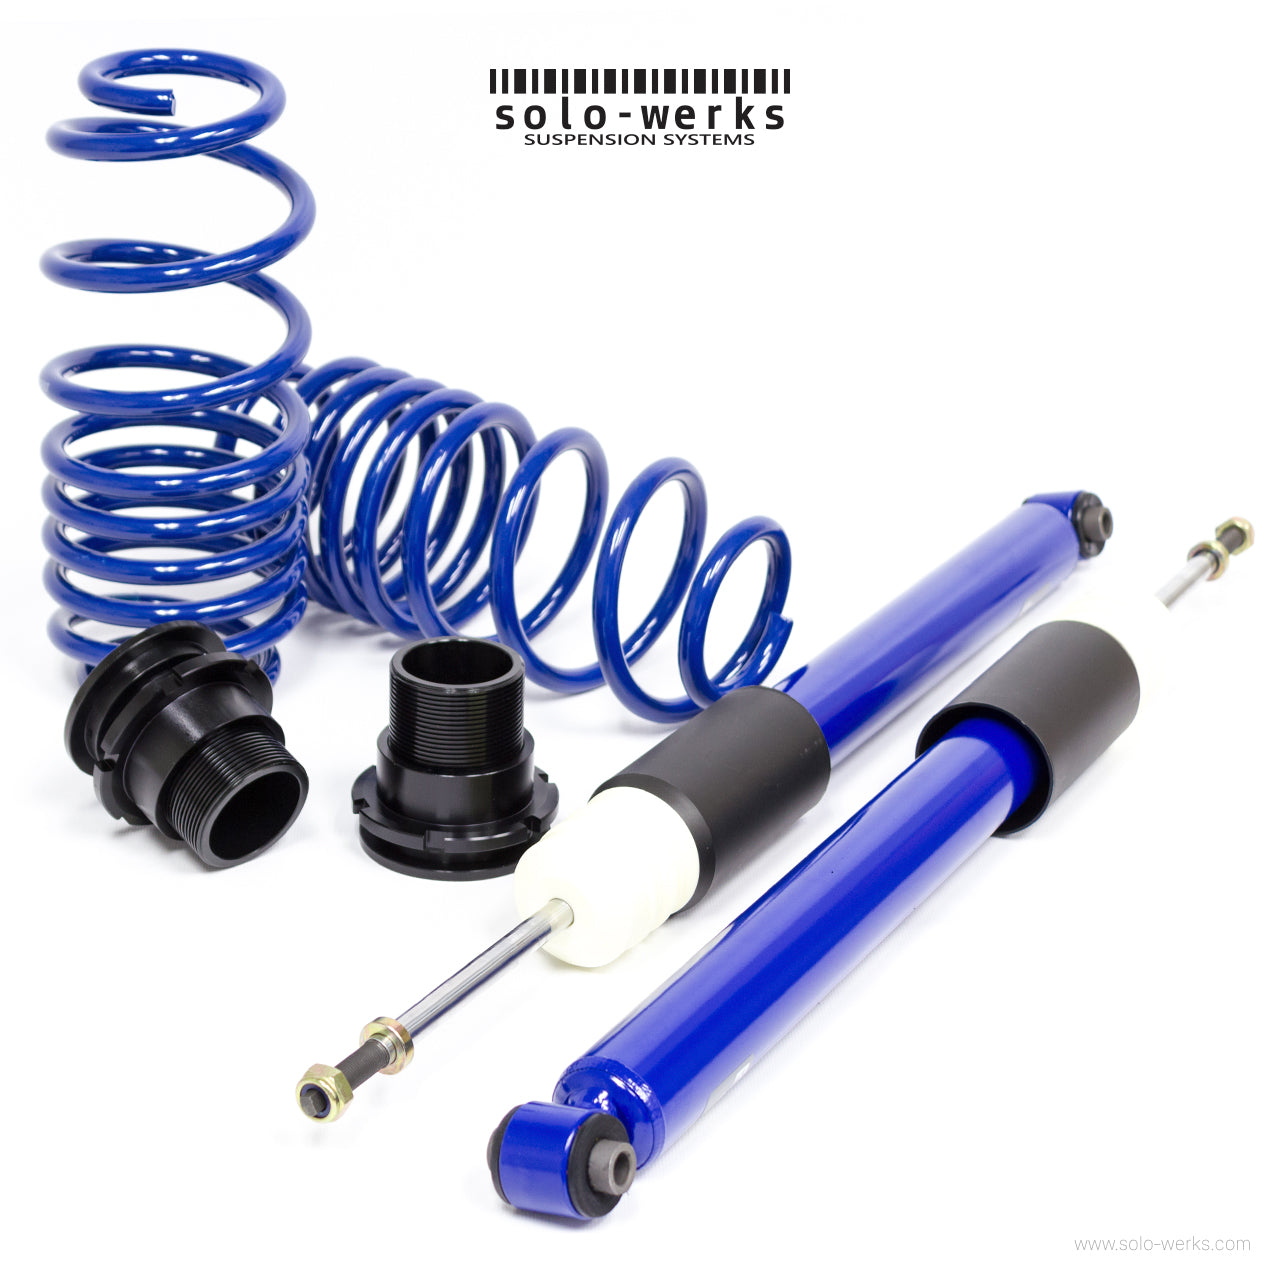 Solo Werks S1 Coilover Kit MK IV 98'-05' 2wd Golf Jetta Beetle